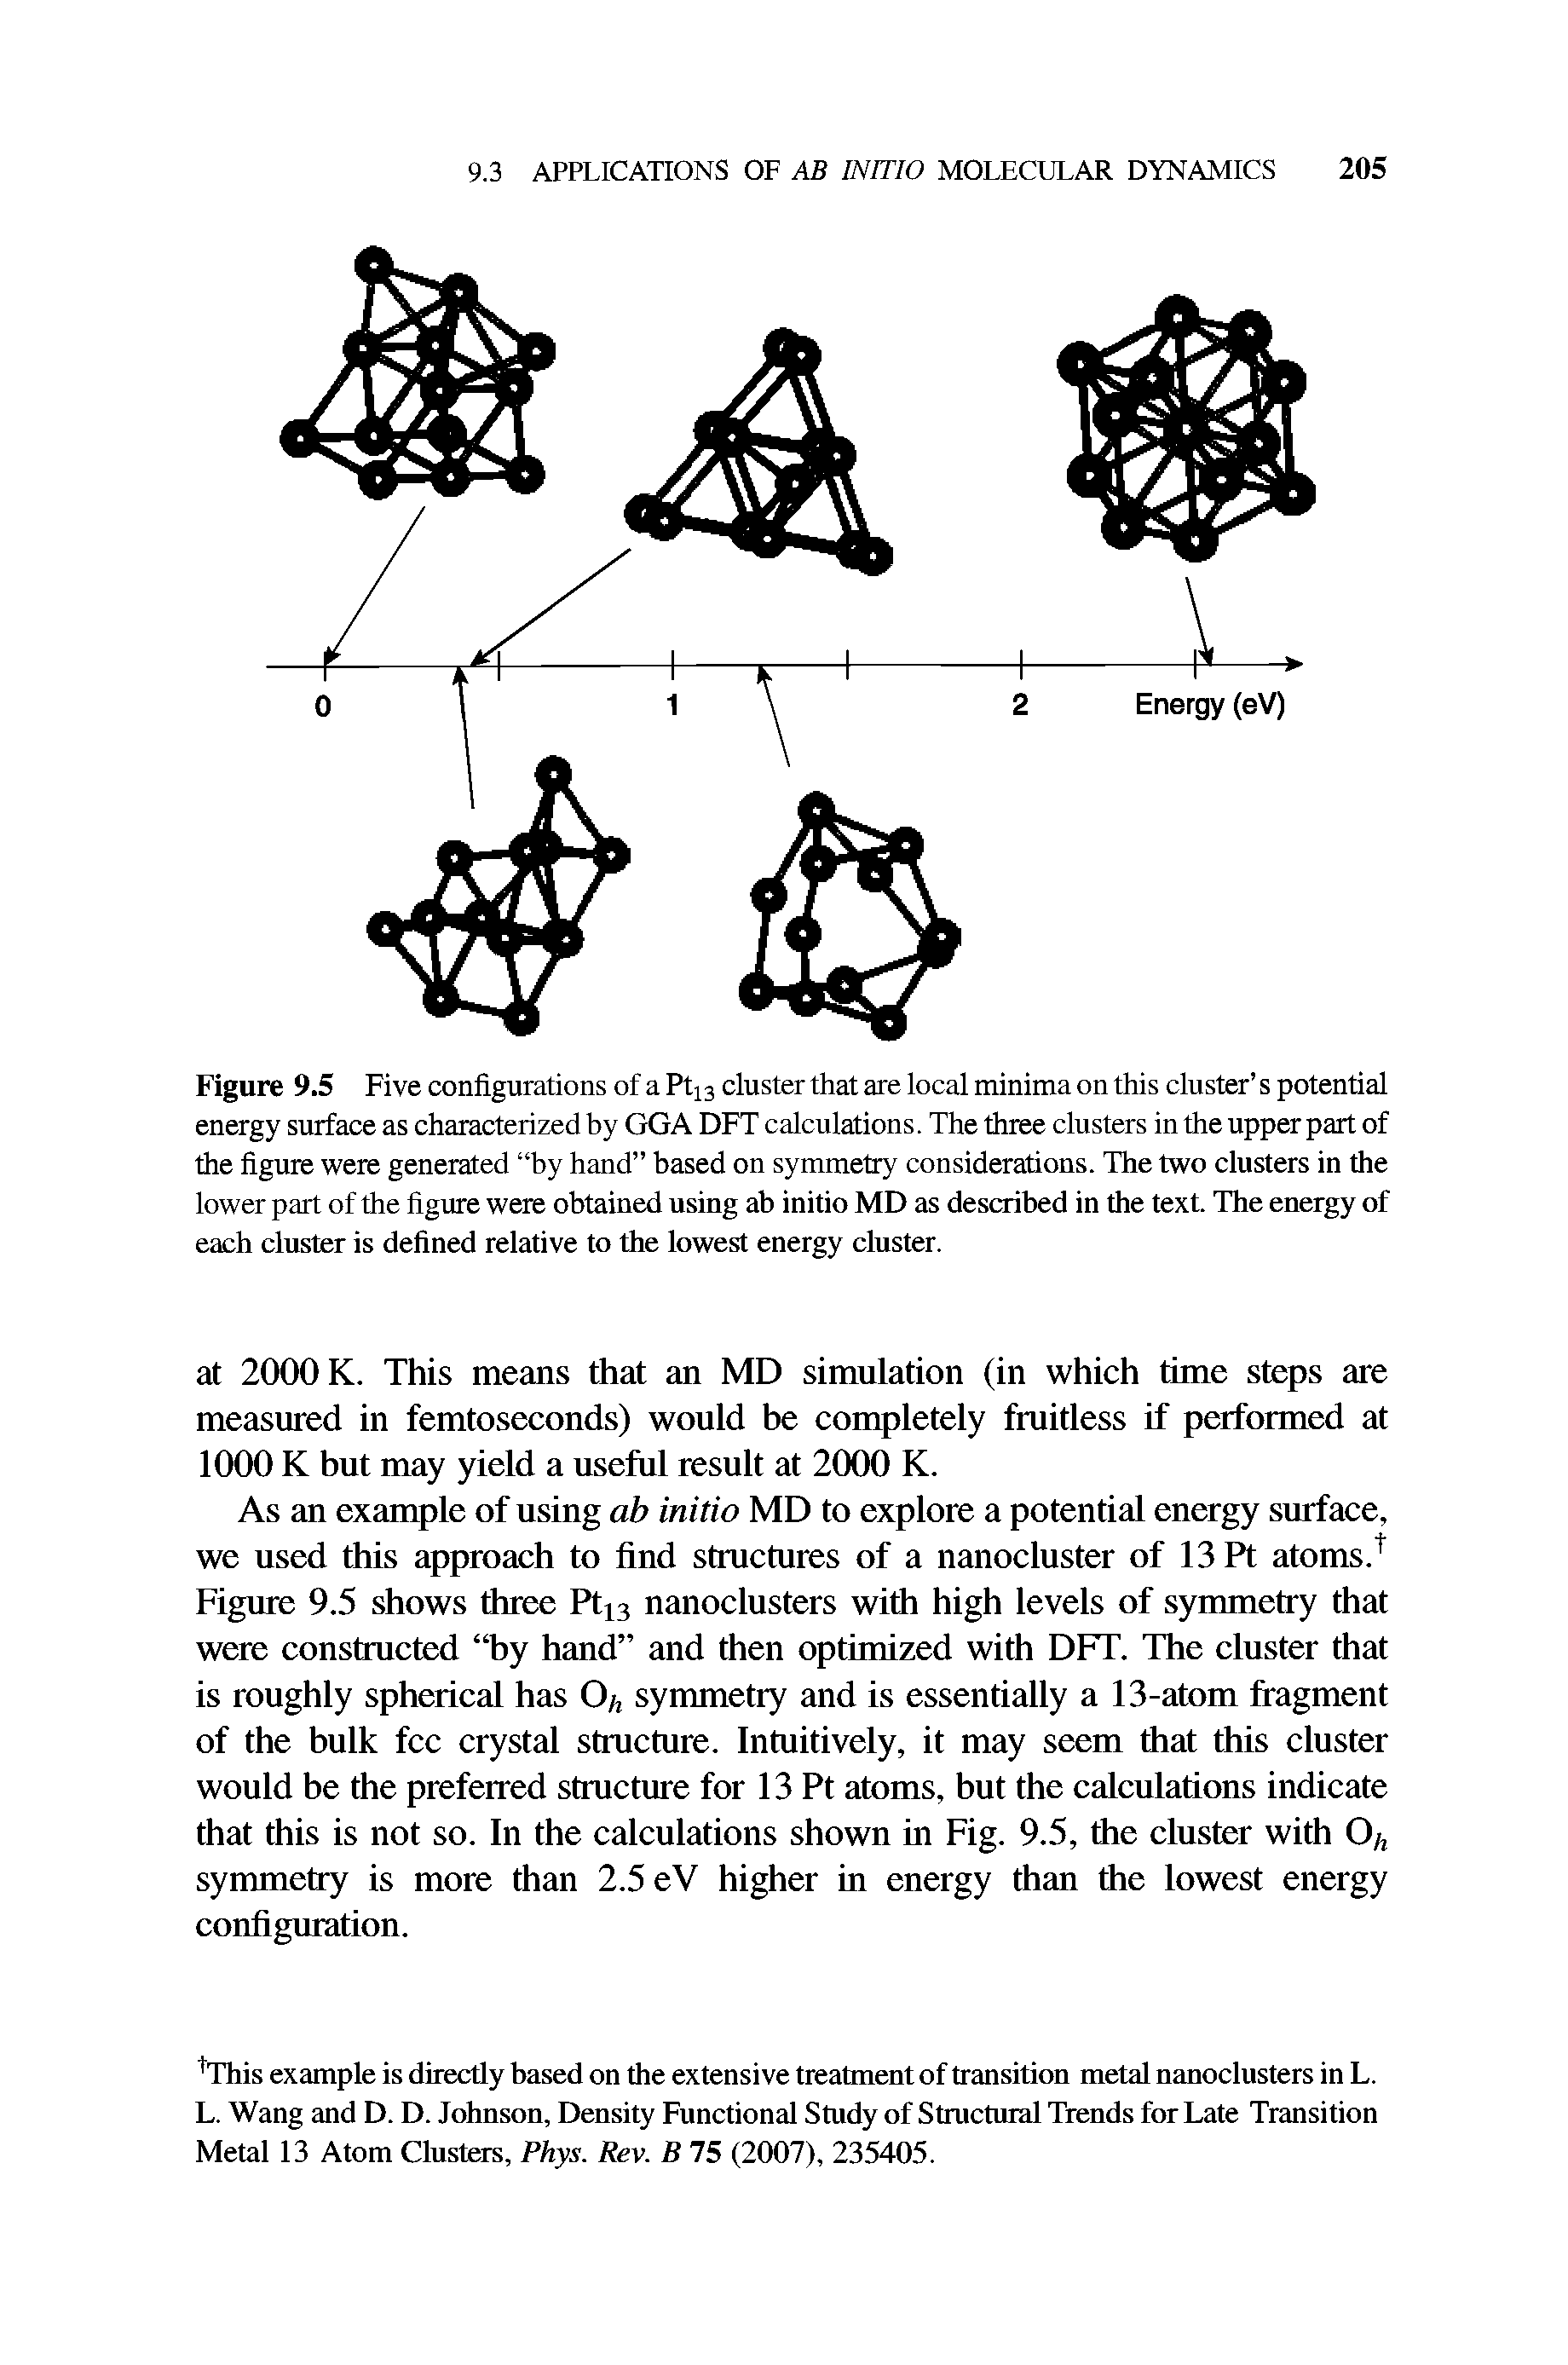 Figure 9.5 Five configurations of a Pt13 cluster that are local minima on this cluster s potential energy surface as characterized by GGA DFT calculations. The three clusters in the upper part of the figure were generated by hand based on symmetry considerations. The two clusters in the lower part of the figure were obtained using ab initio MD as described in the text. The energy of each cluster is defined relative to the lowest energy cluster.